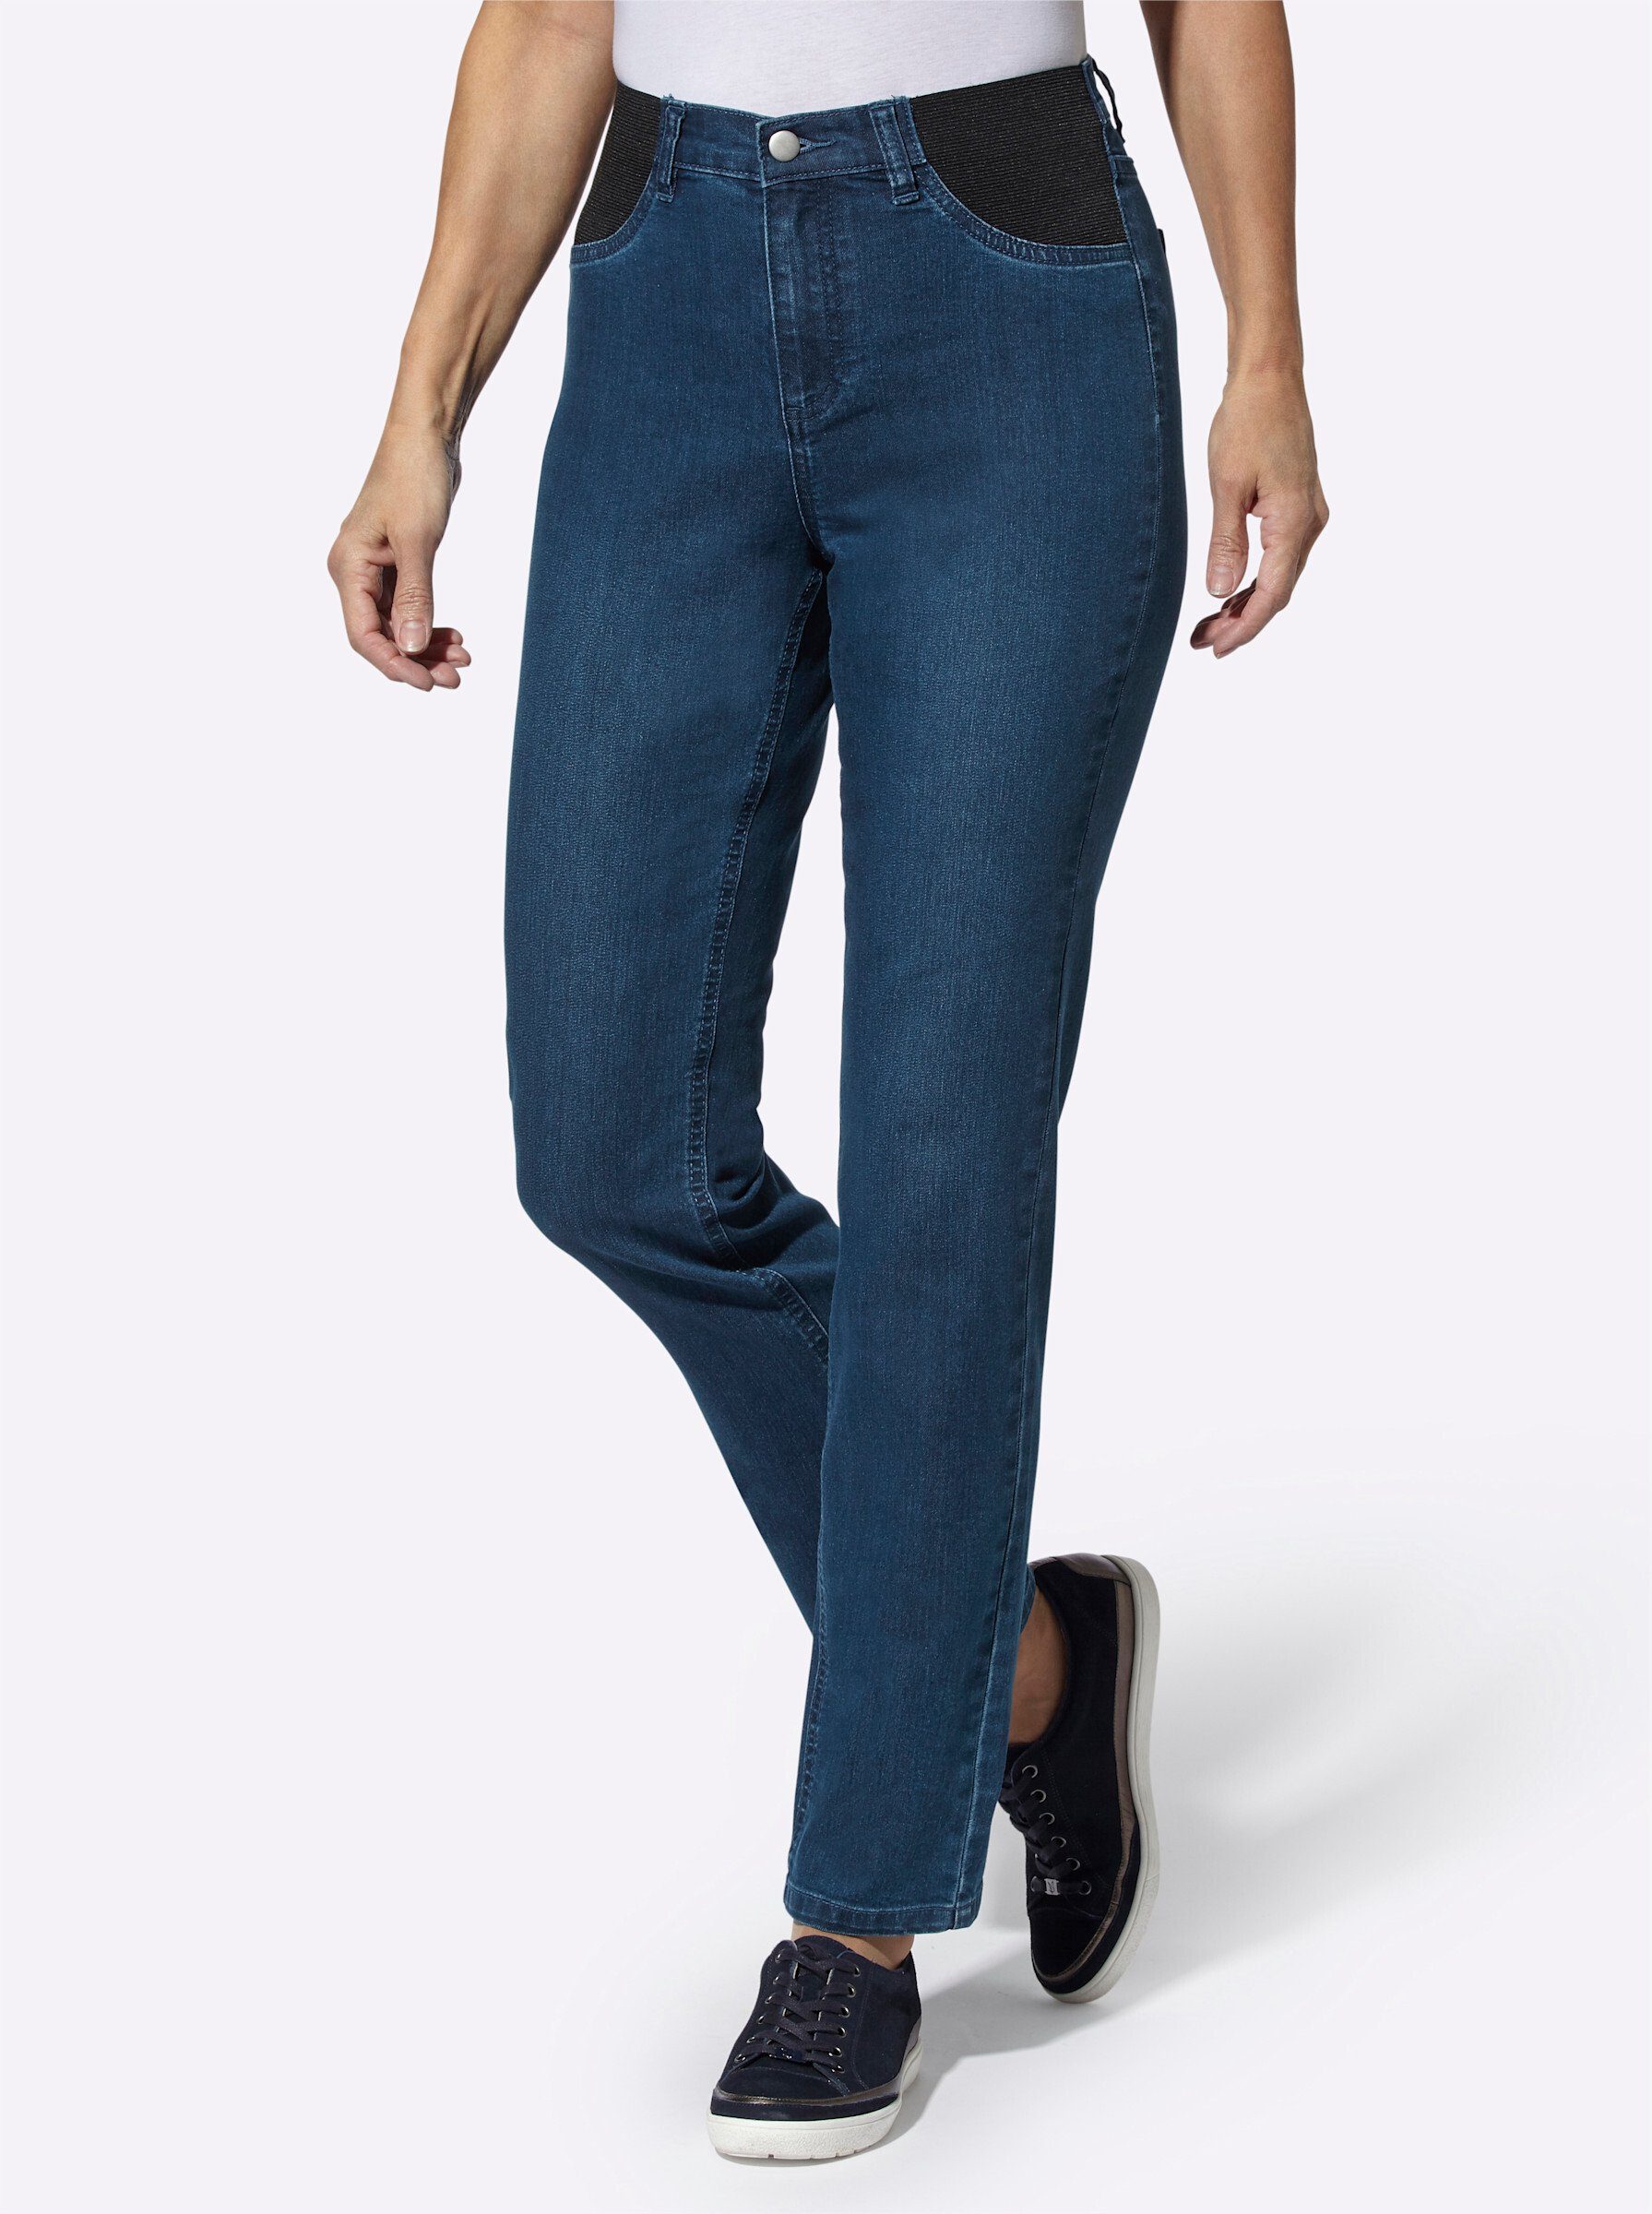 Jeans Sieh Bequeme blue-stone-washed an!